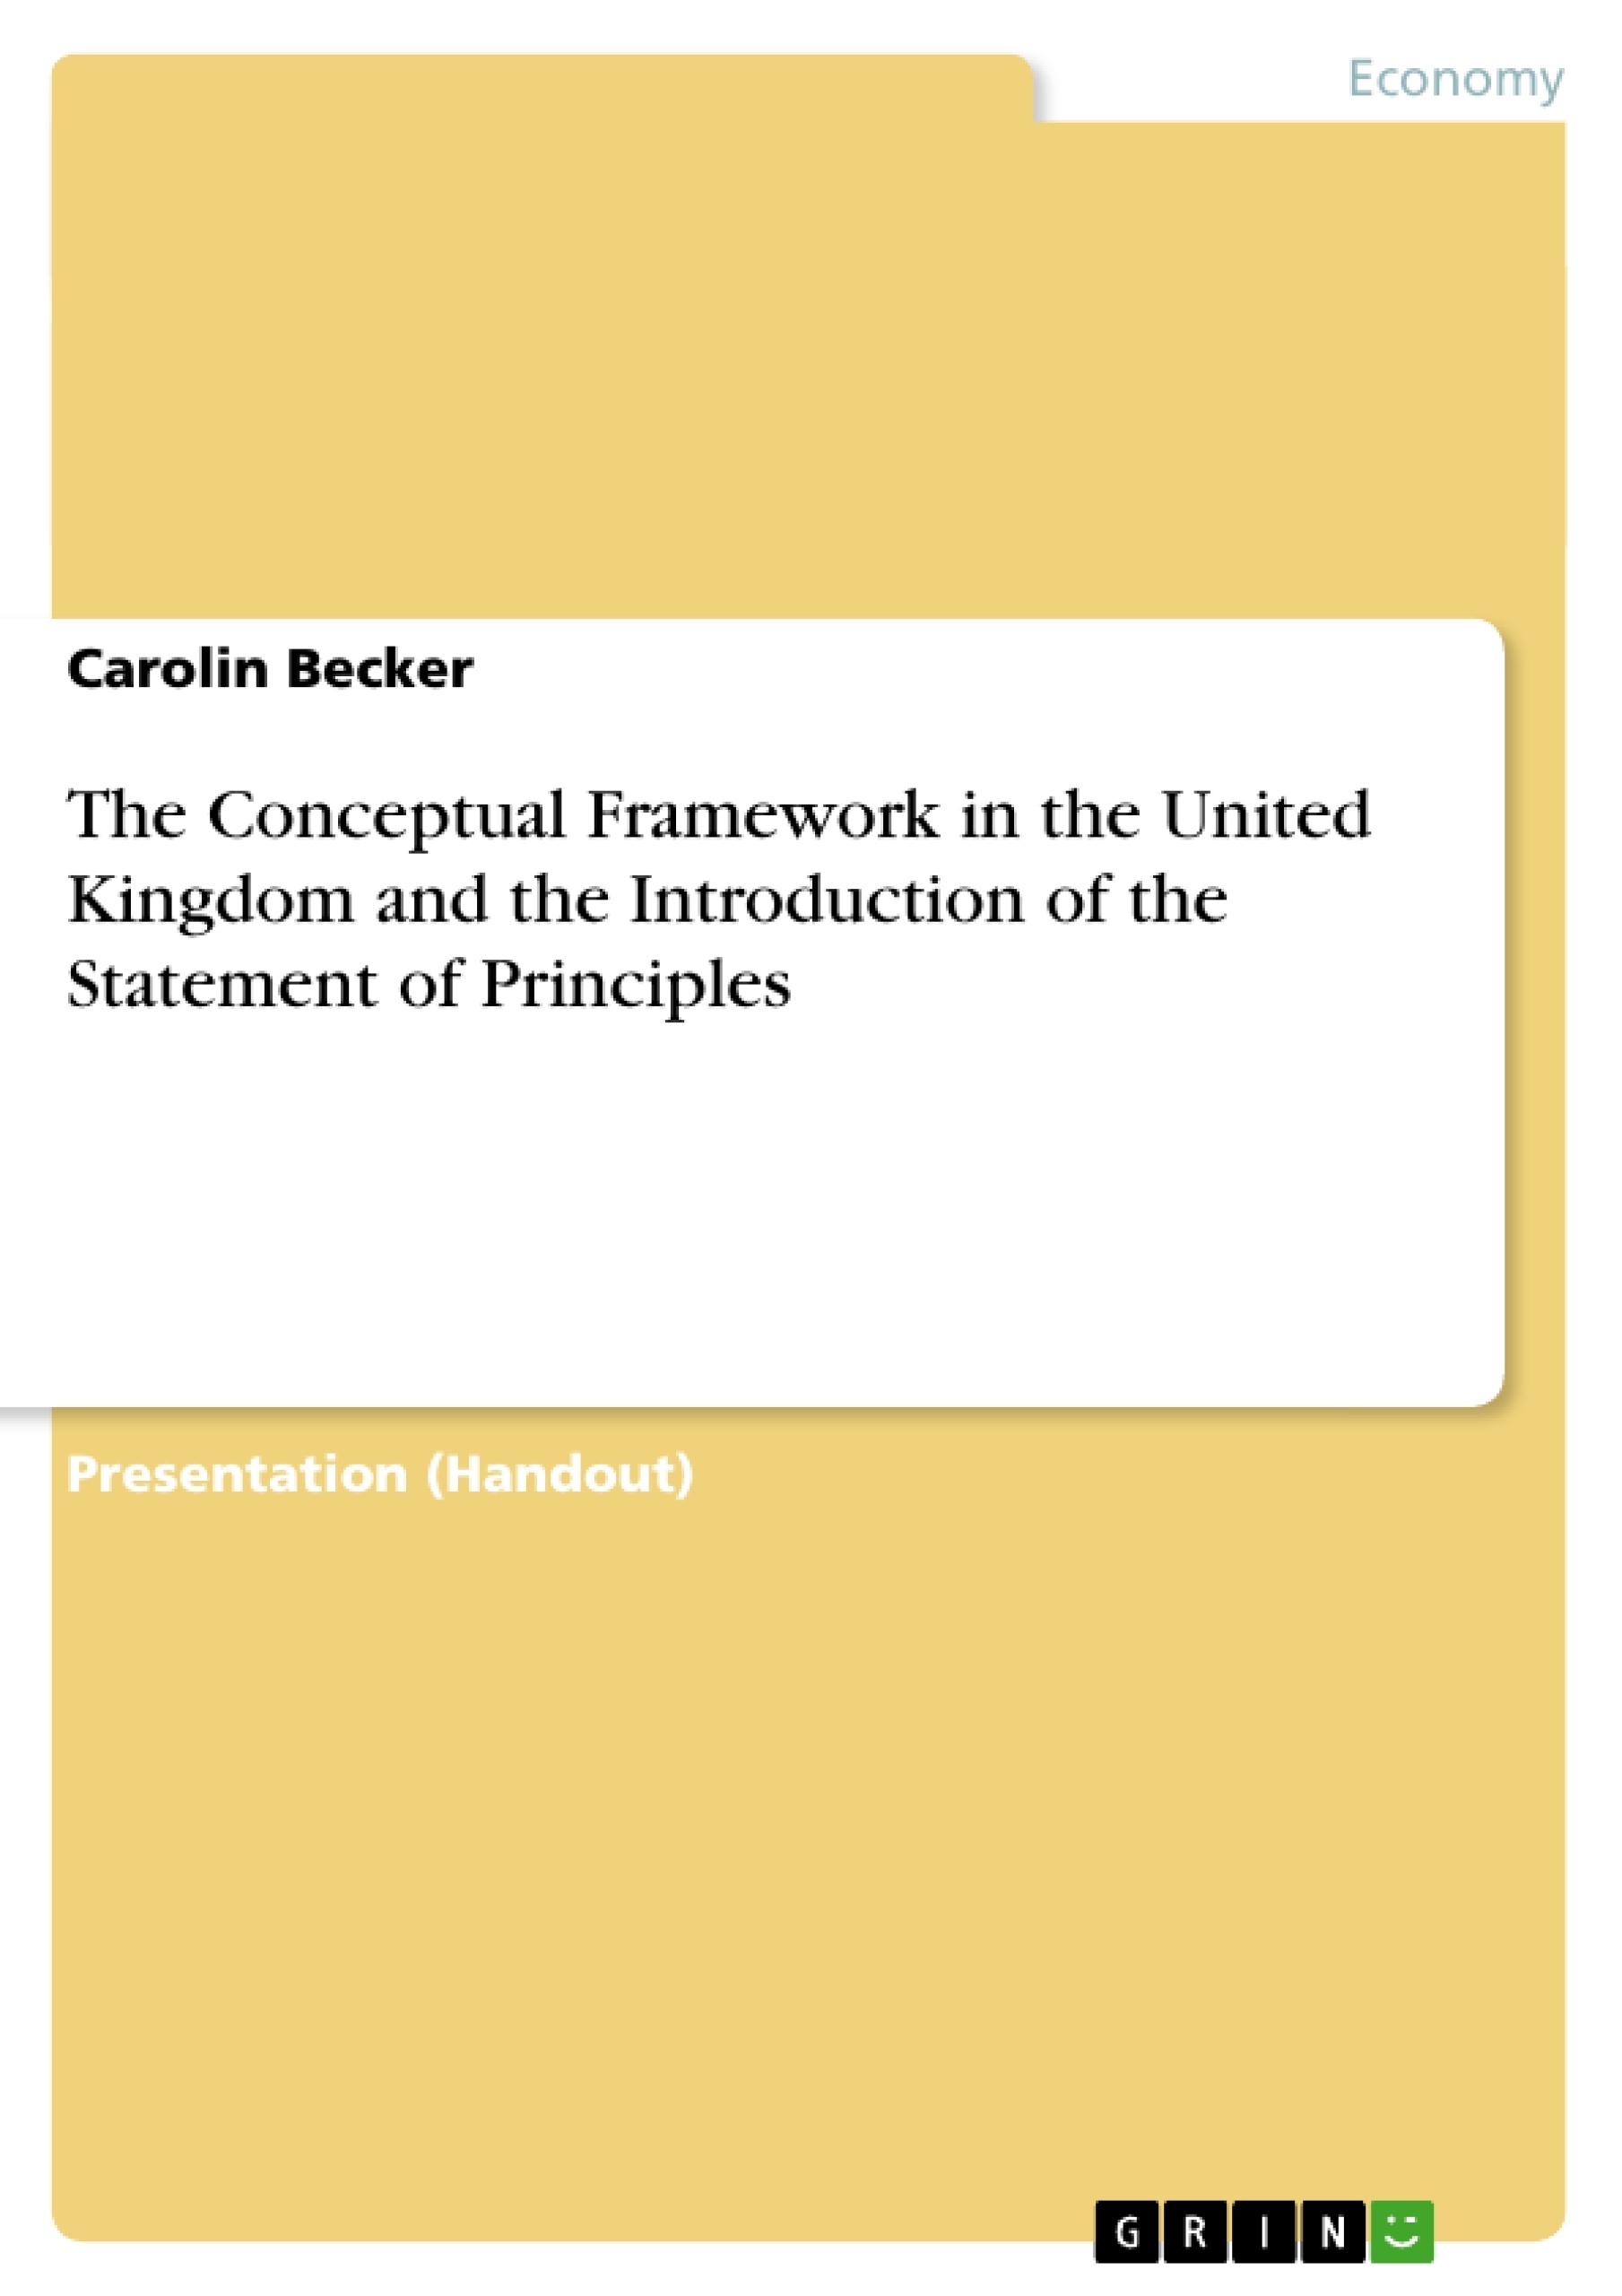 Título: The Conceptual Framework in the United Kingdom and the Introduction of the Statement of Principles